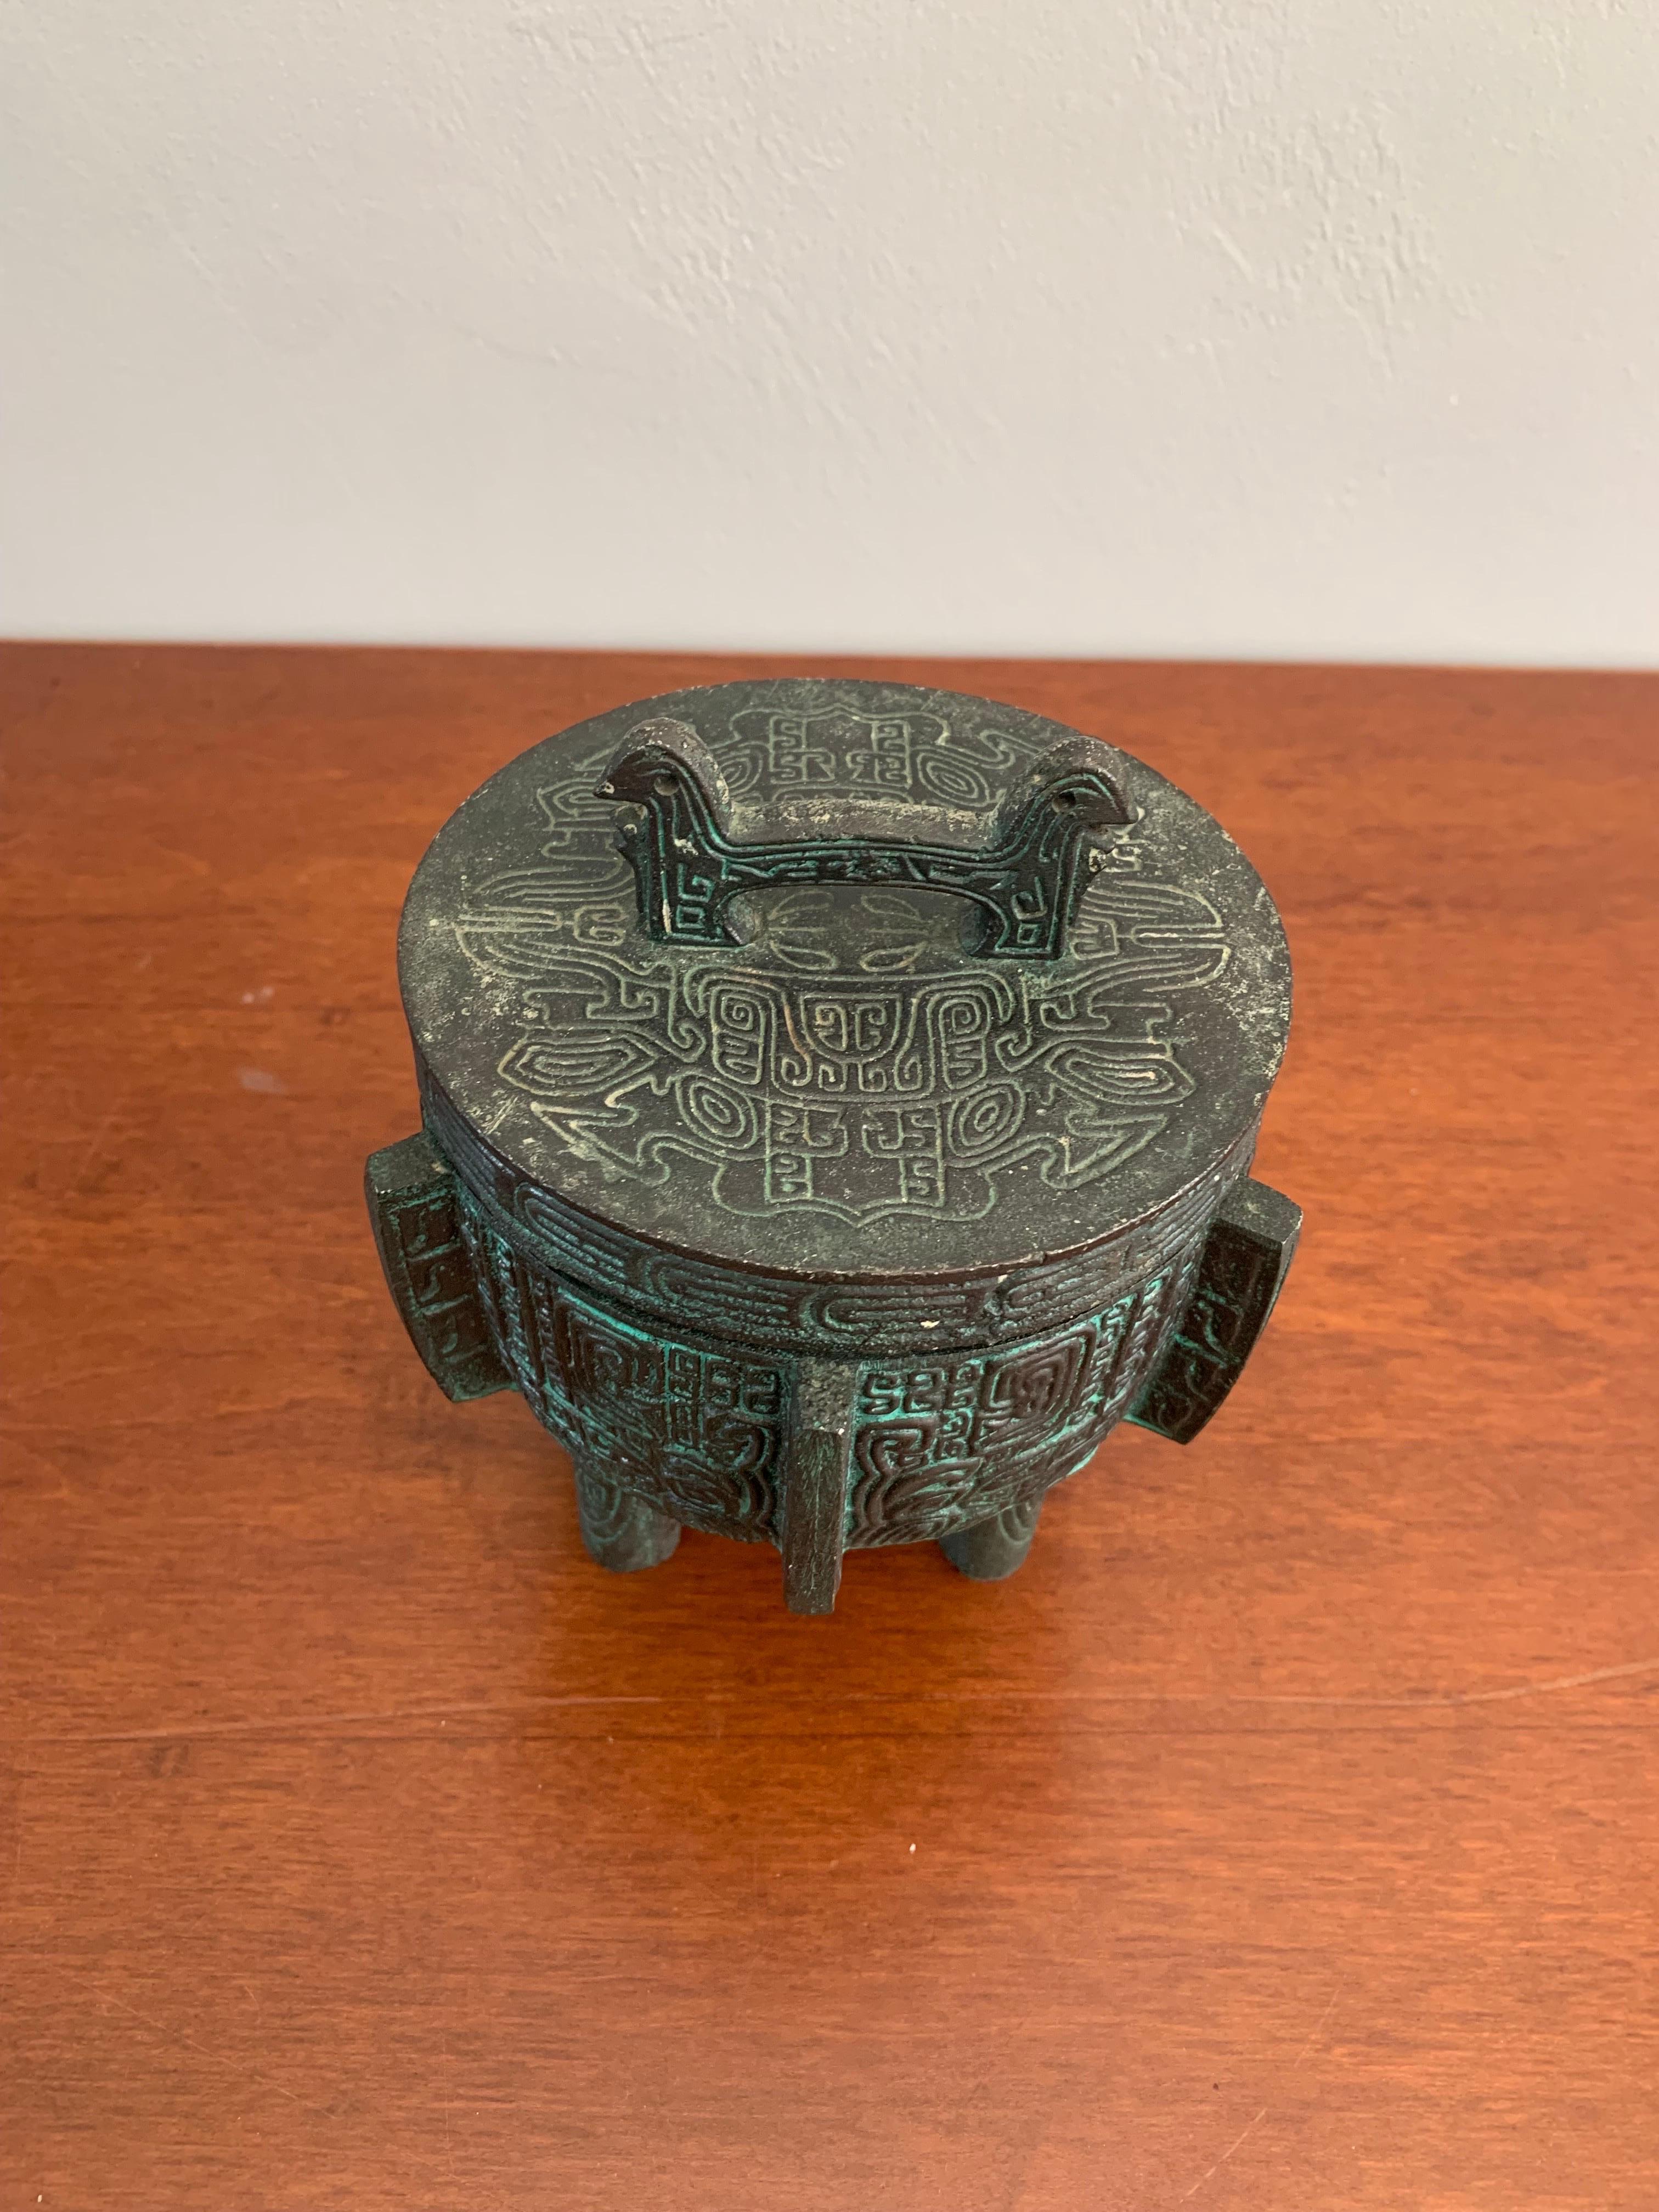 Beautiful and unique ashtray attributed to James Mont, circa 1960s. Has a Mayan/Aztec theme design throughout. 

Mostly in great shape with some light damage to the ashtray tray. 

6.5” tall
6” across